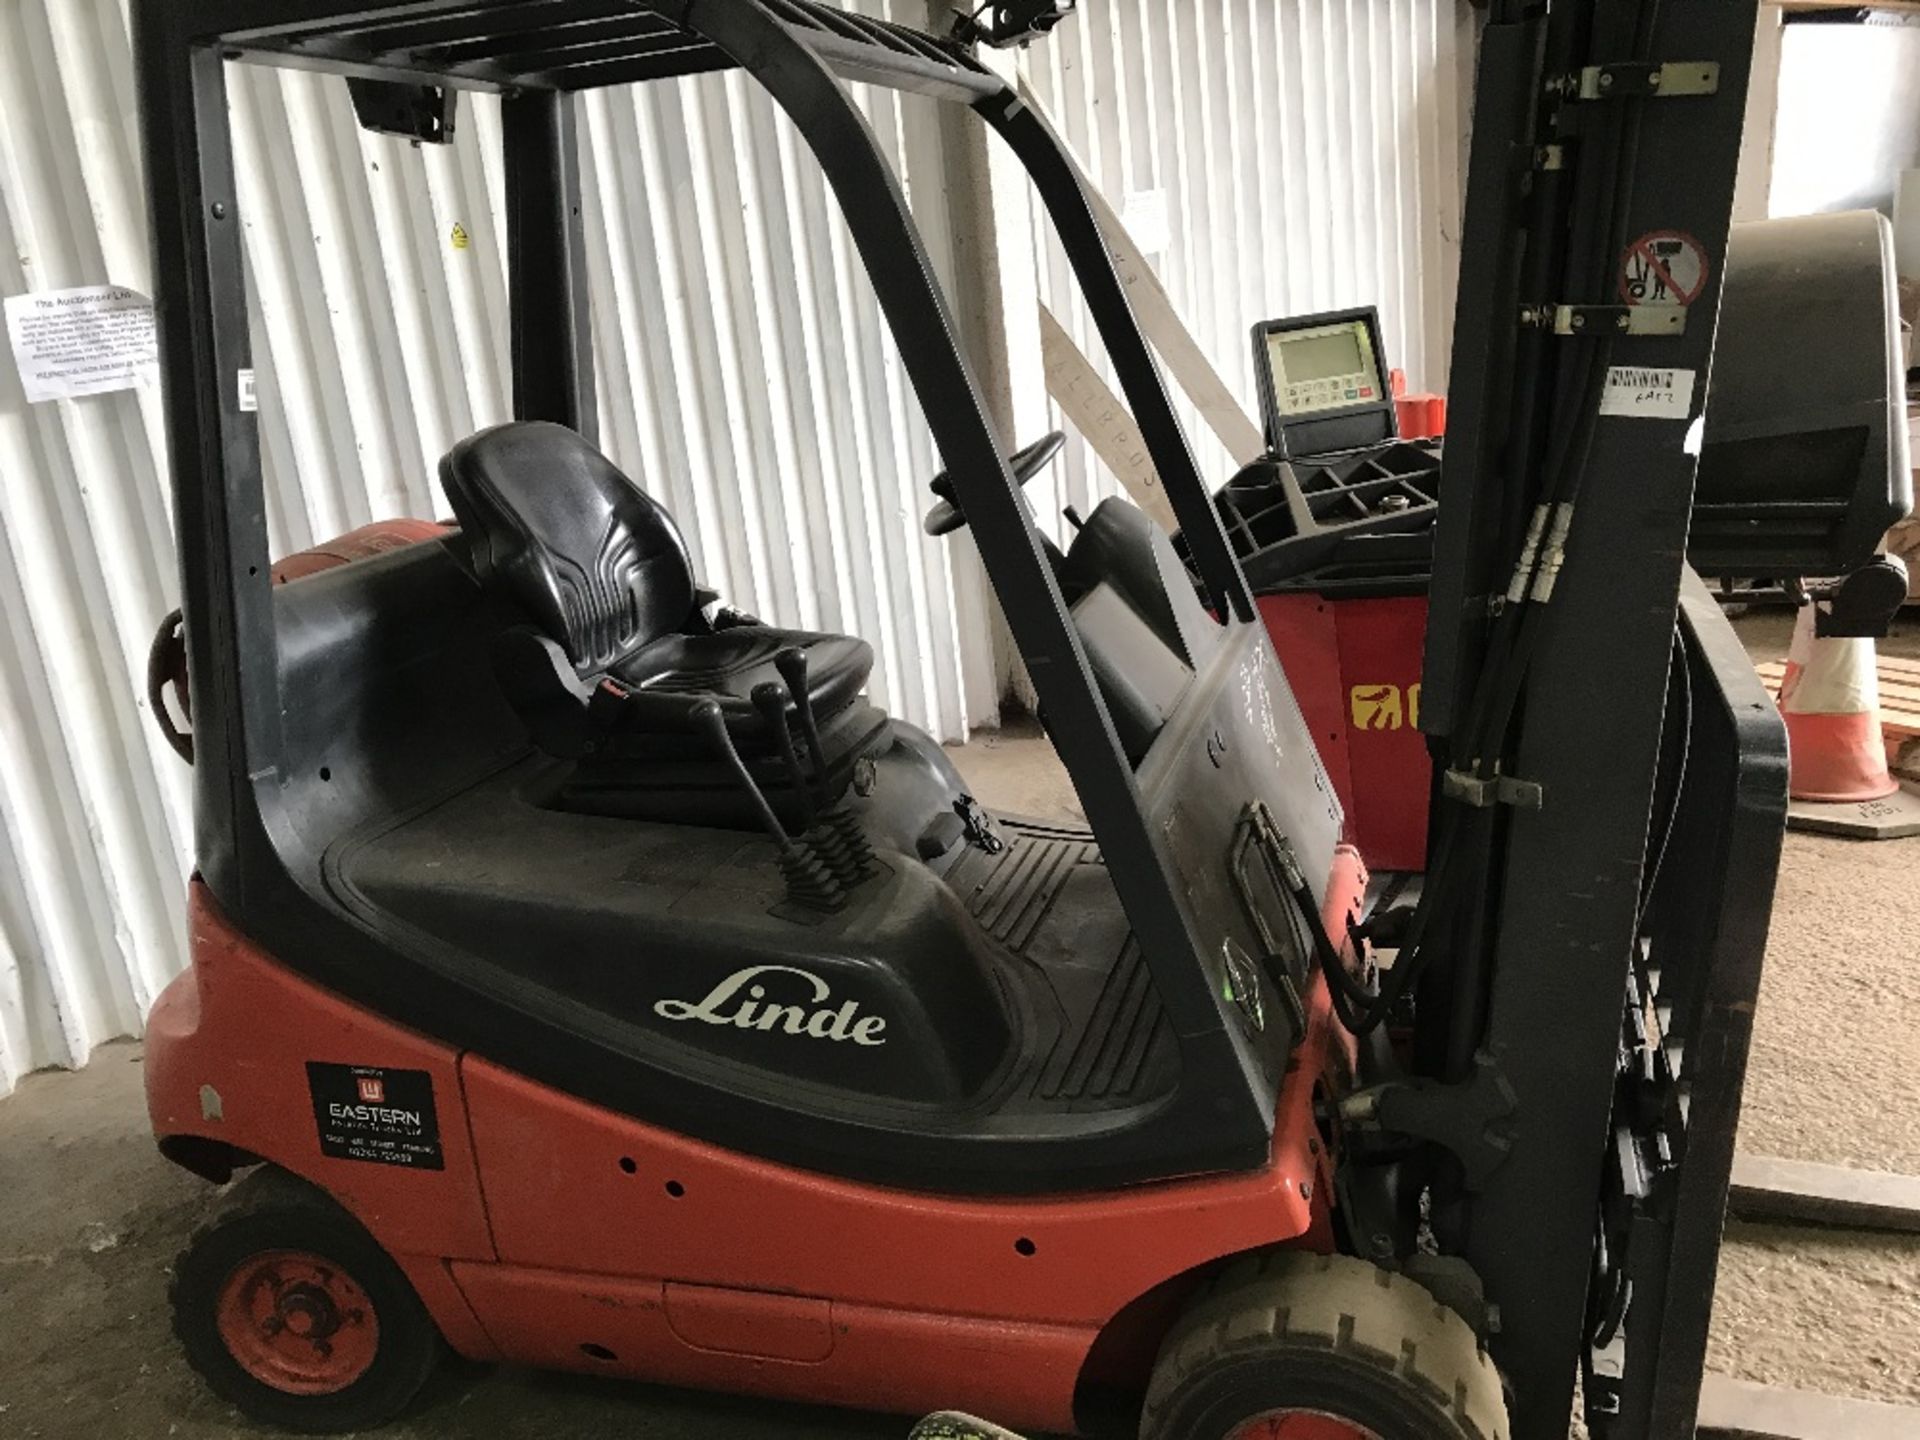 LINDE 2 TONNE GAS FORKLIFT YEAR 2006 TYPE H20T-03 SN:H2X350T00537. WHEN TESTED WAS SEEN TO DRIVE,